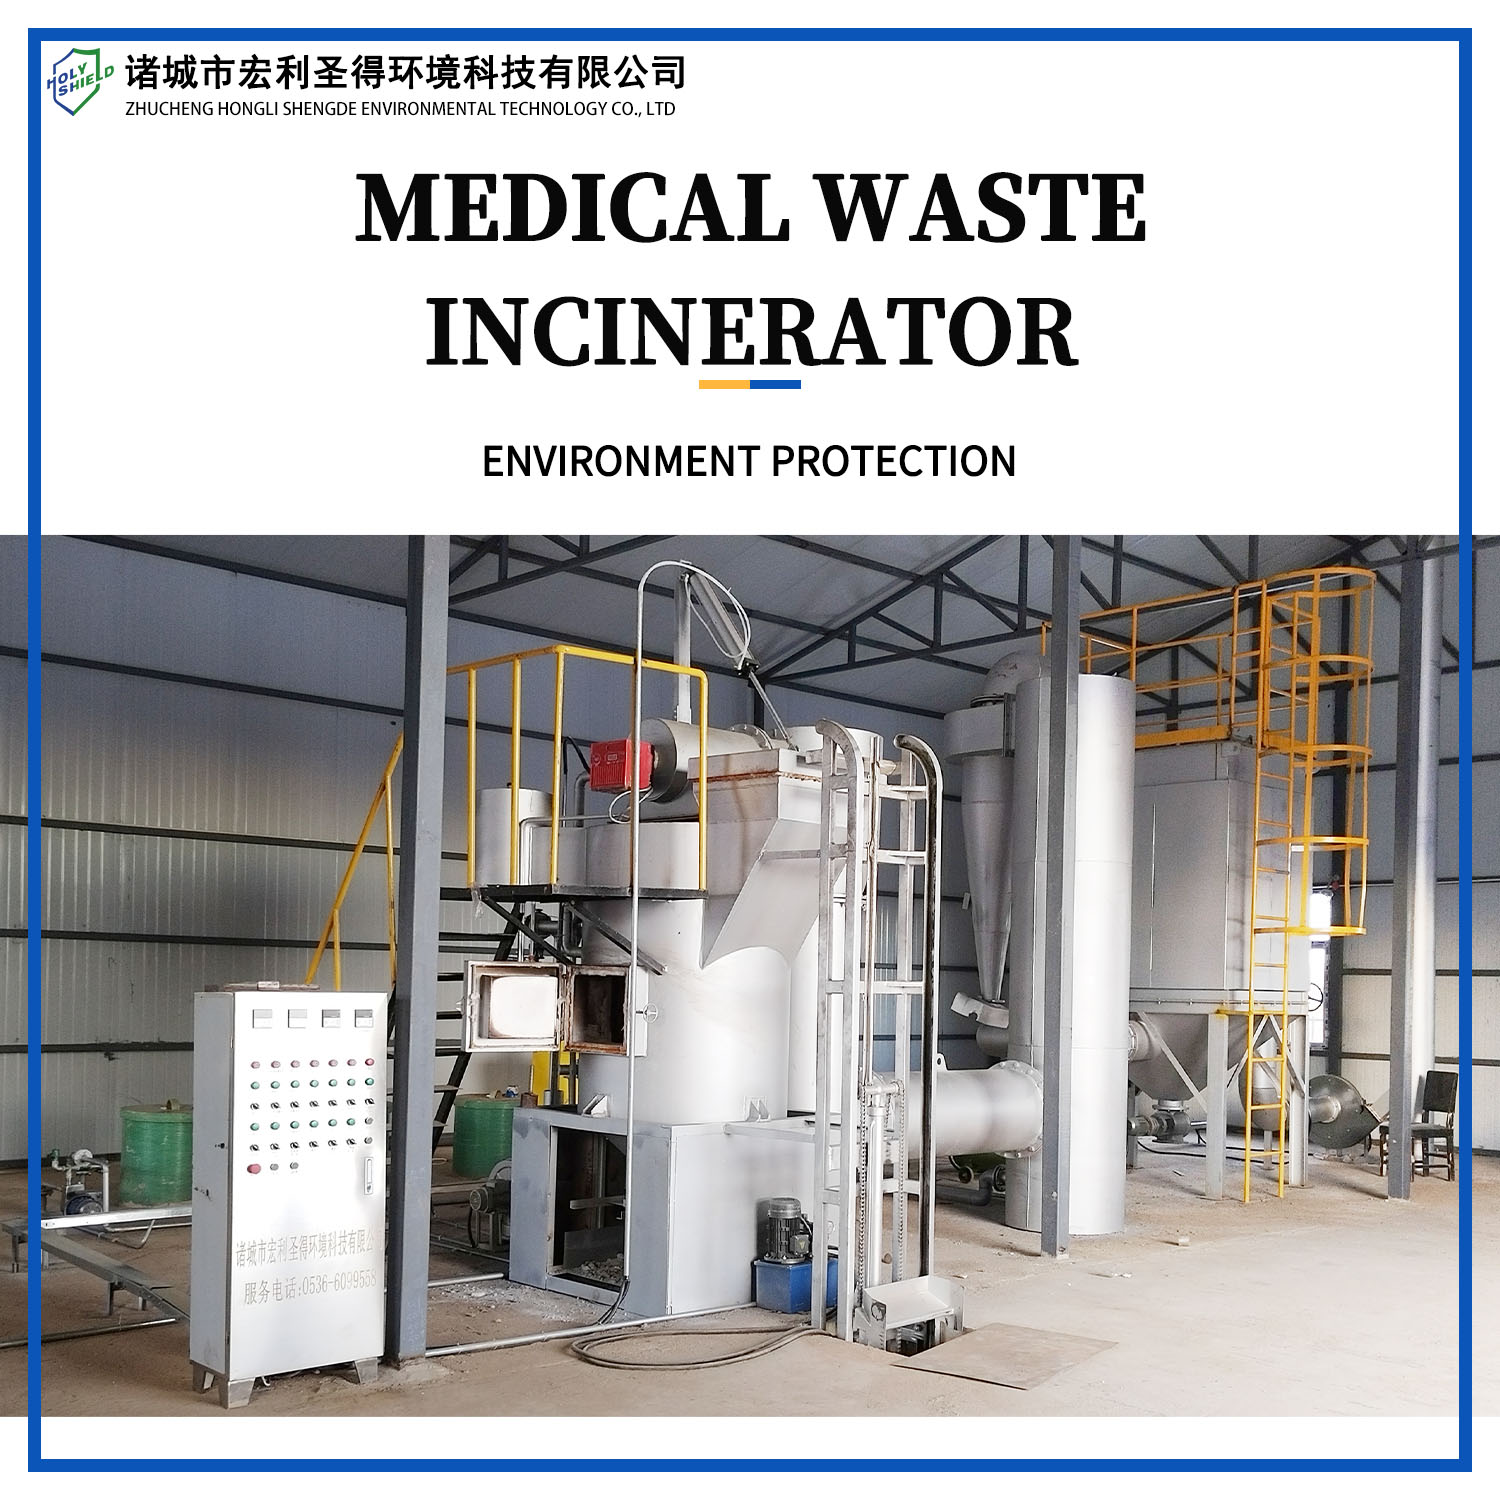 Attention should be paid to medical waste disposal